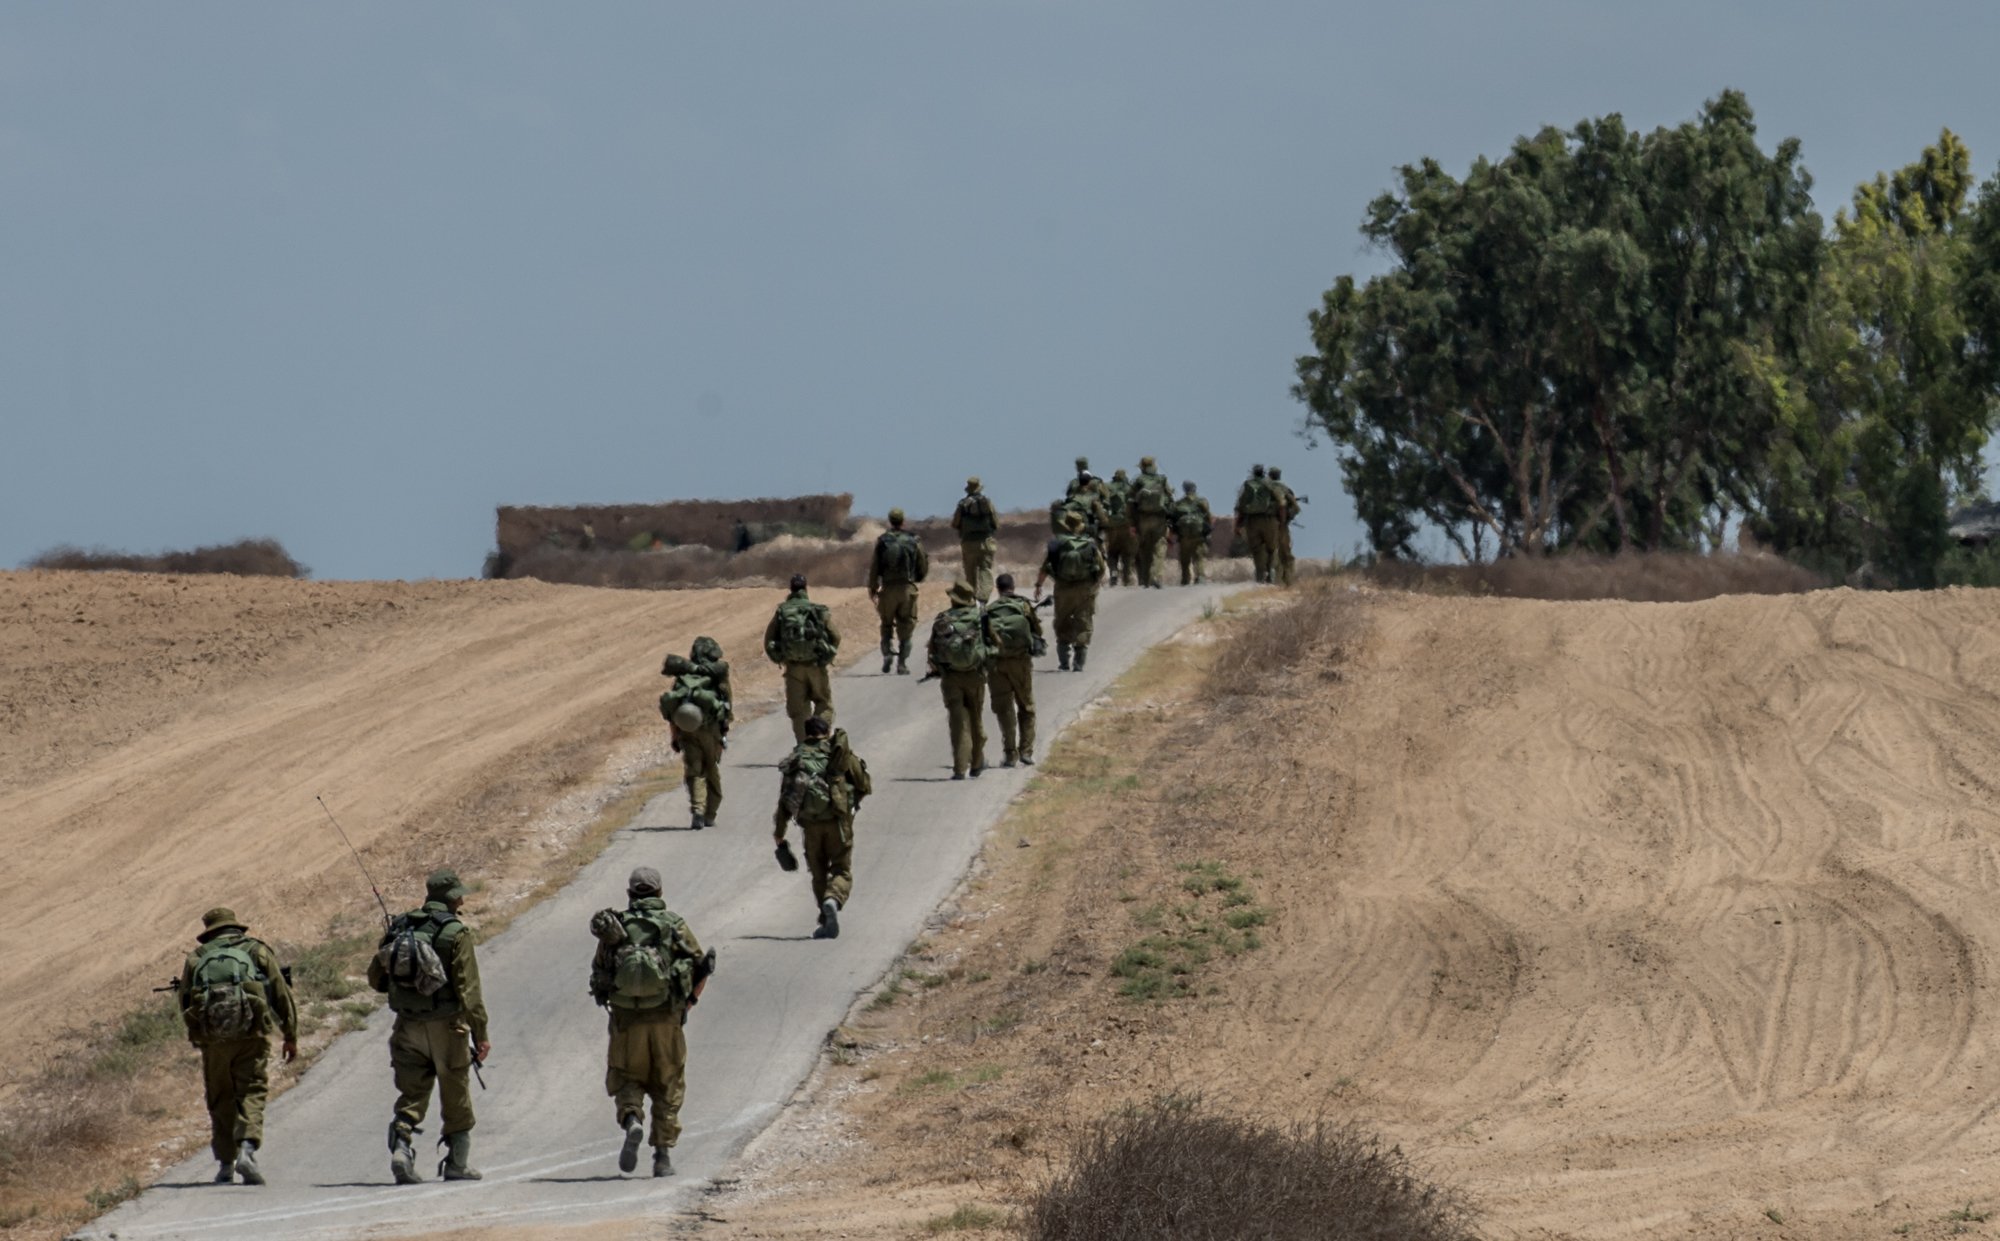 Israeli soldiers march in southern Israel near the border with Gaza, on July 18, 2014, the 11th day of Operation Protective Edge. 